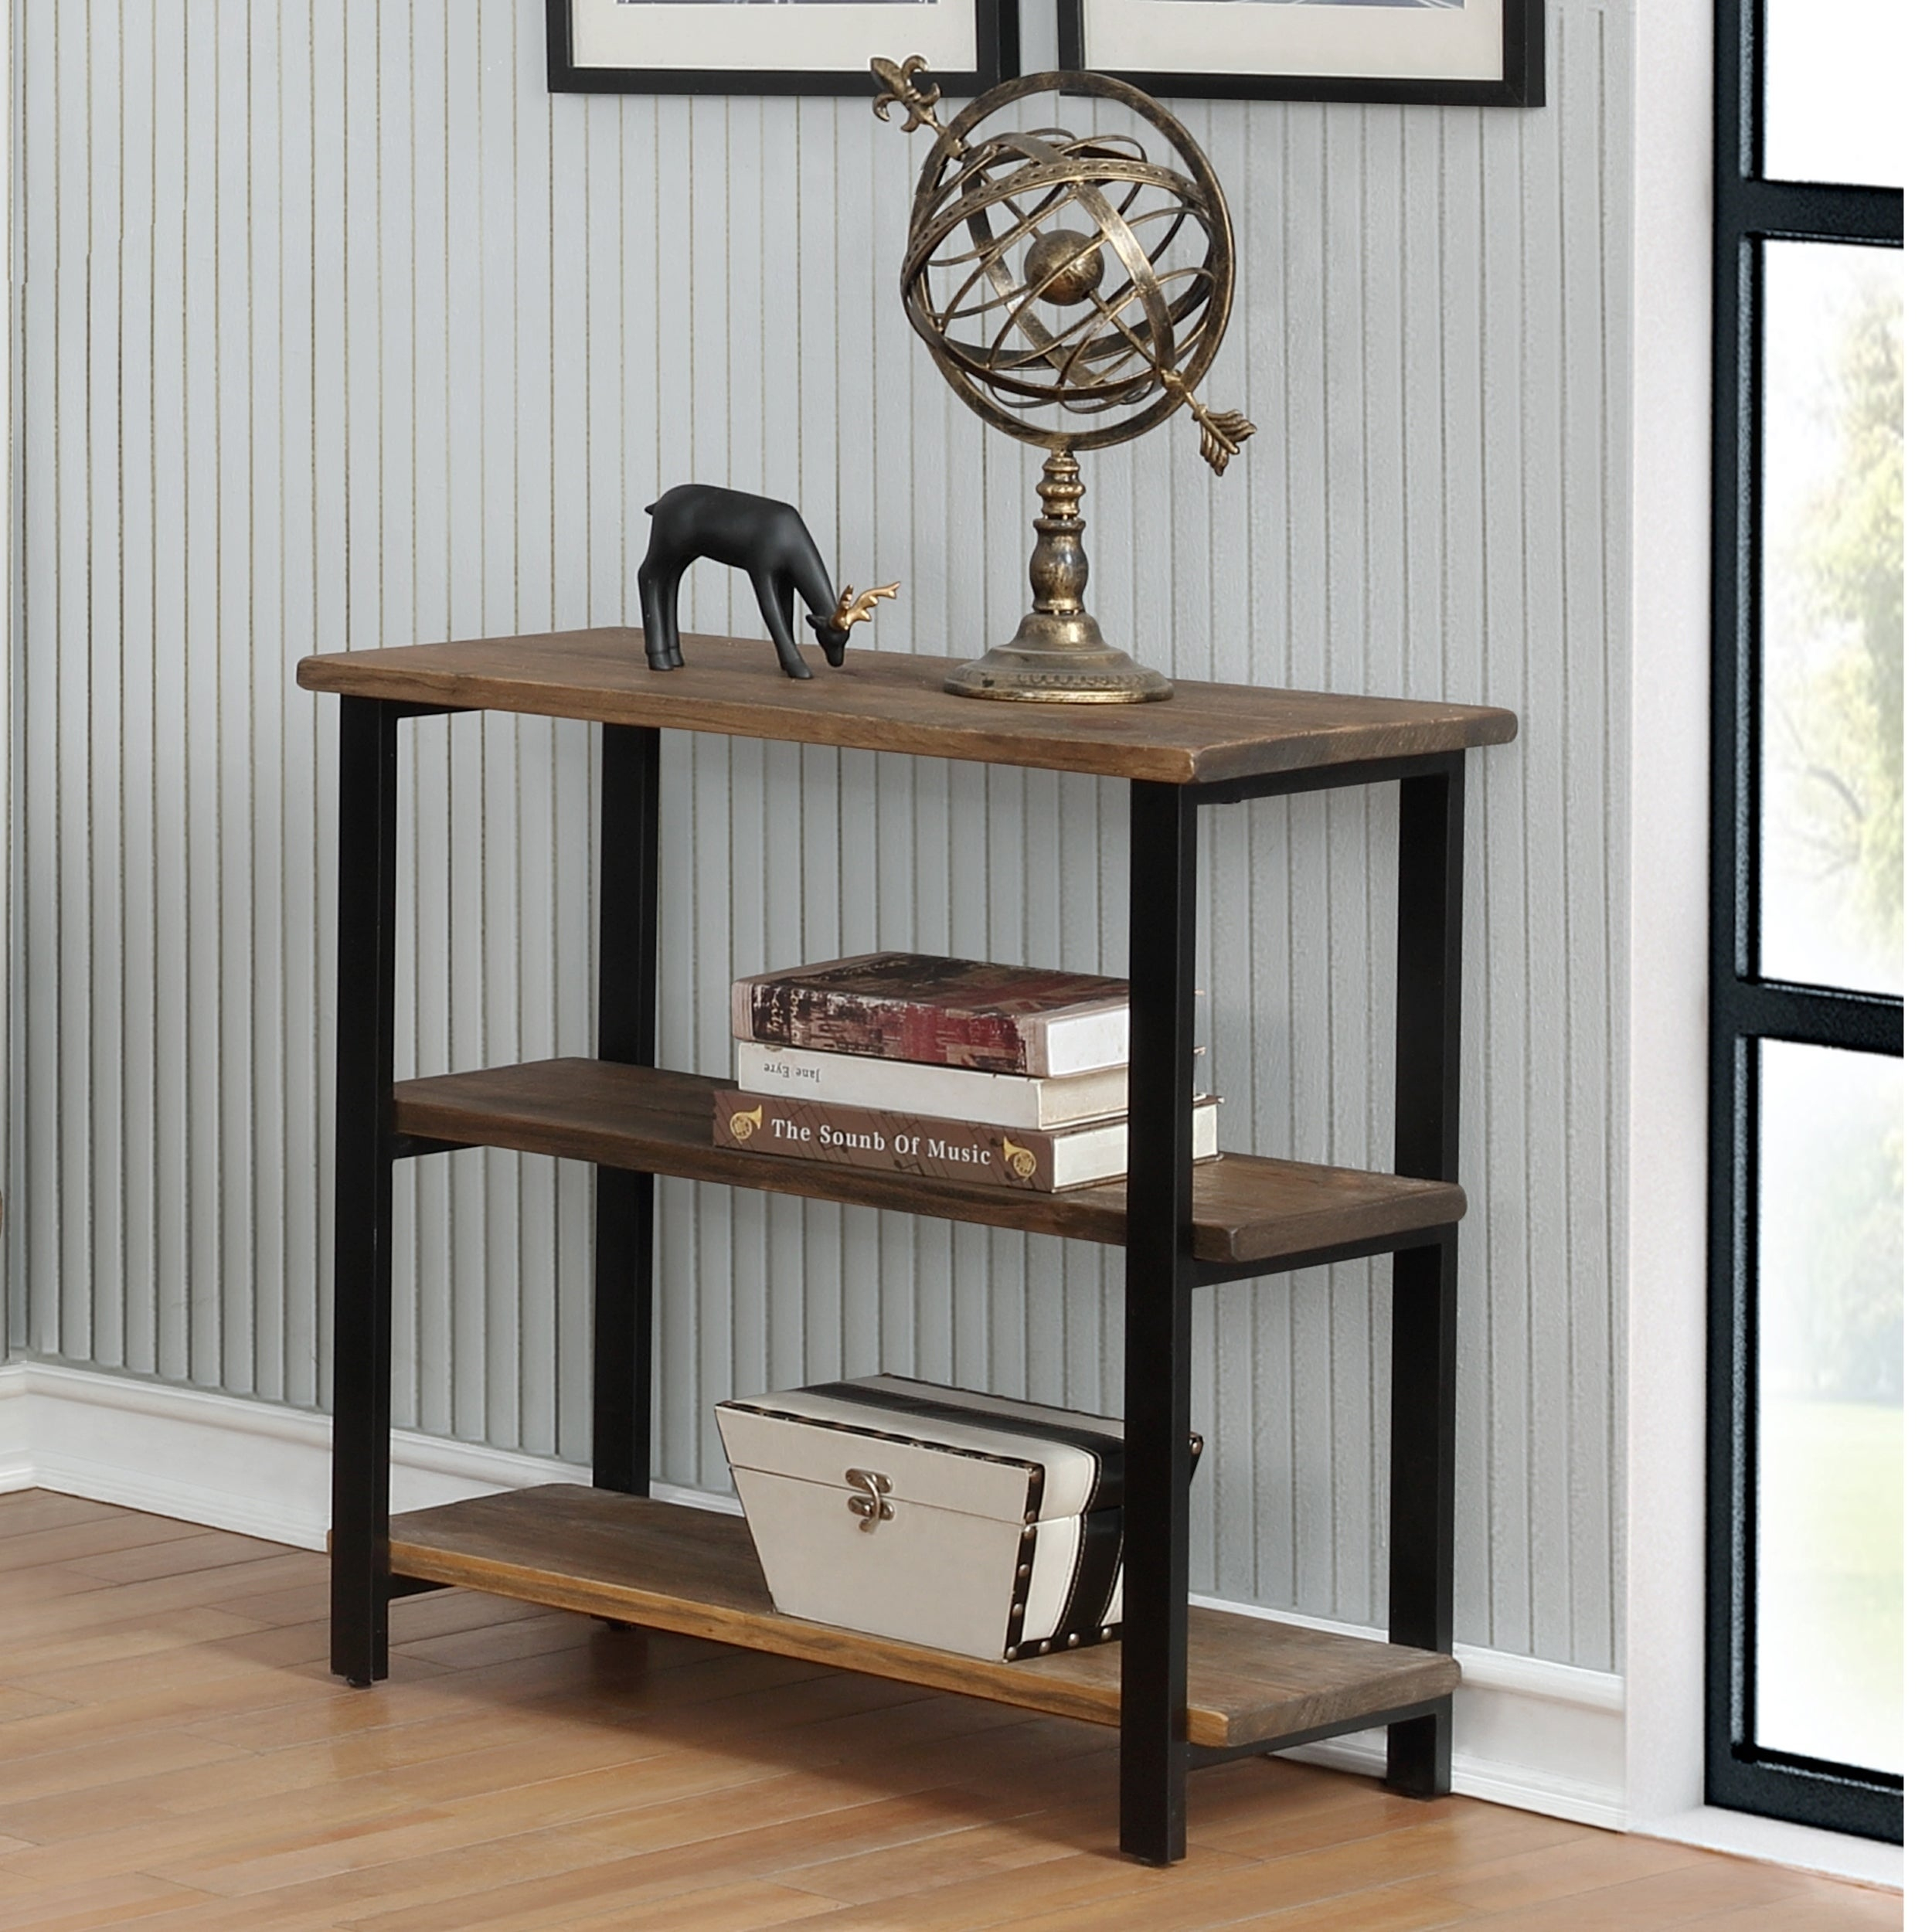 Carbon Loft Lawrence 2 Shelf Metal And Solid Wood Under Window Bookcase with regard to sizing 2500 X 2500